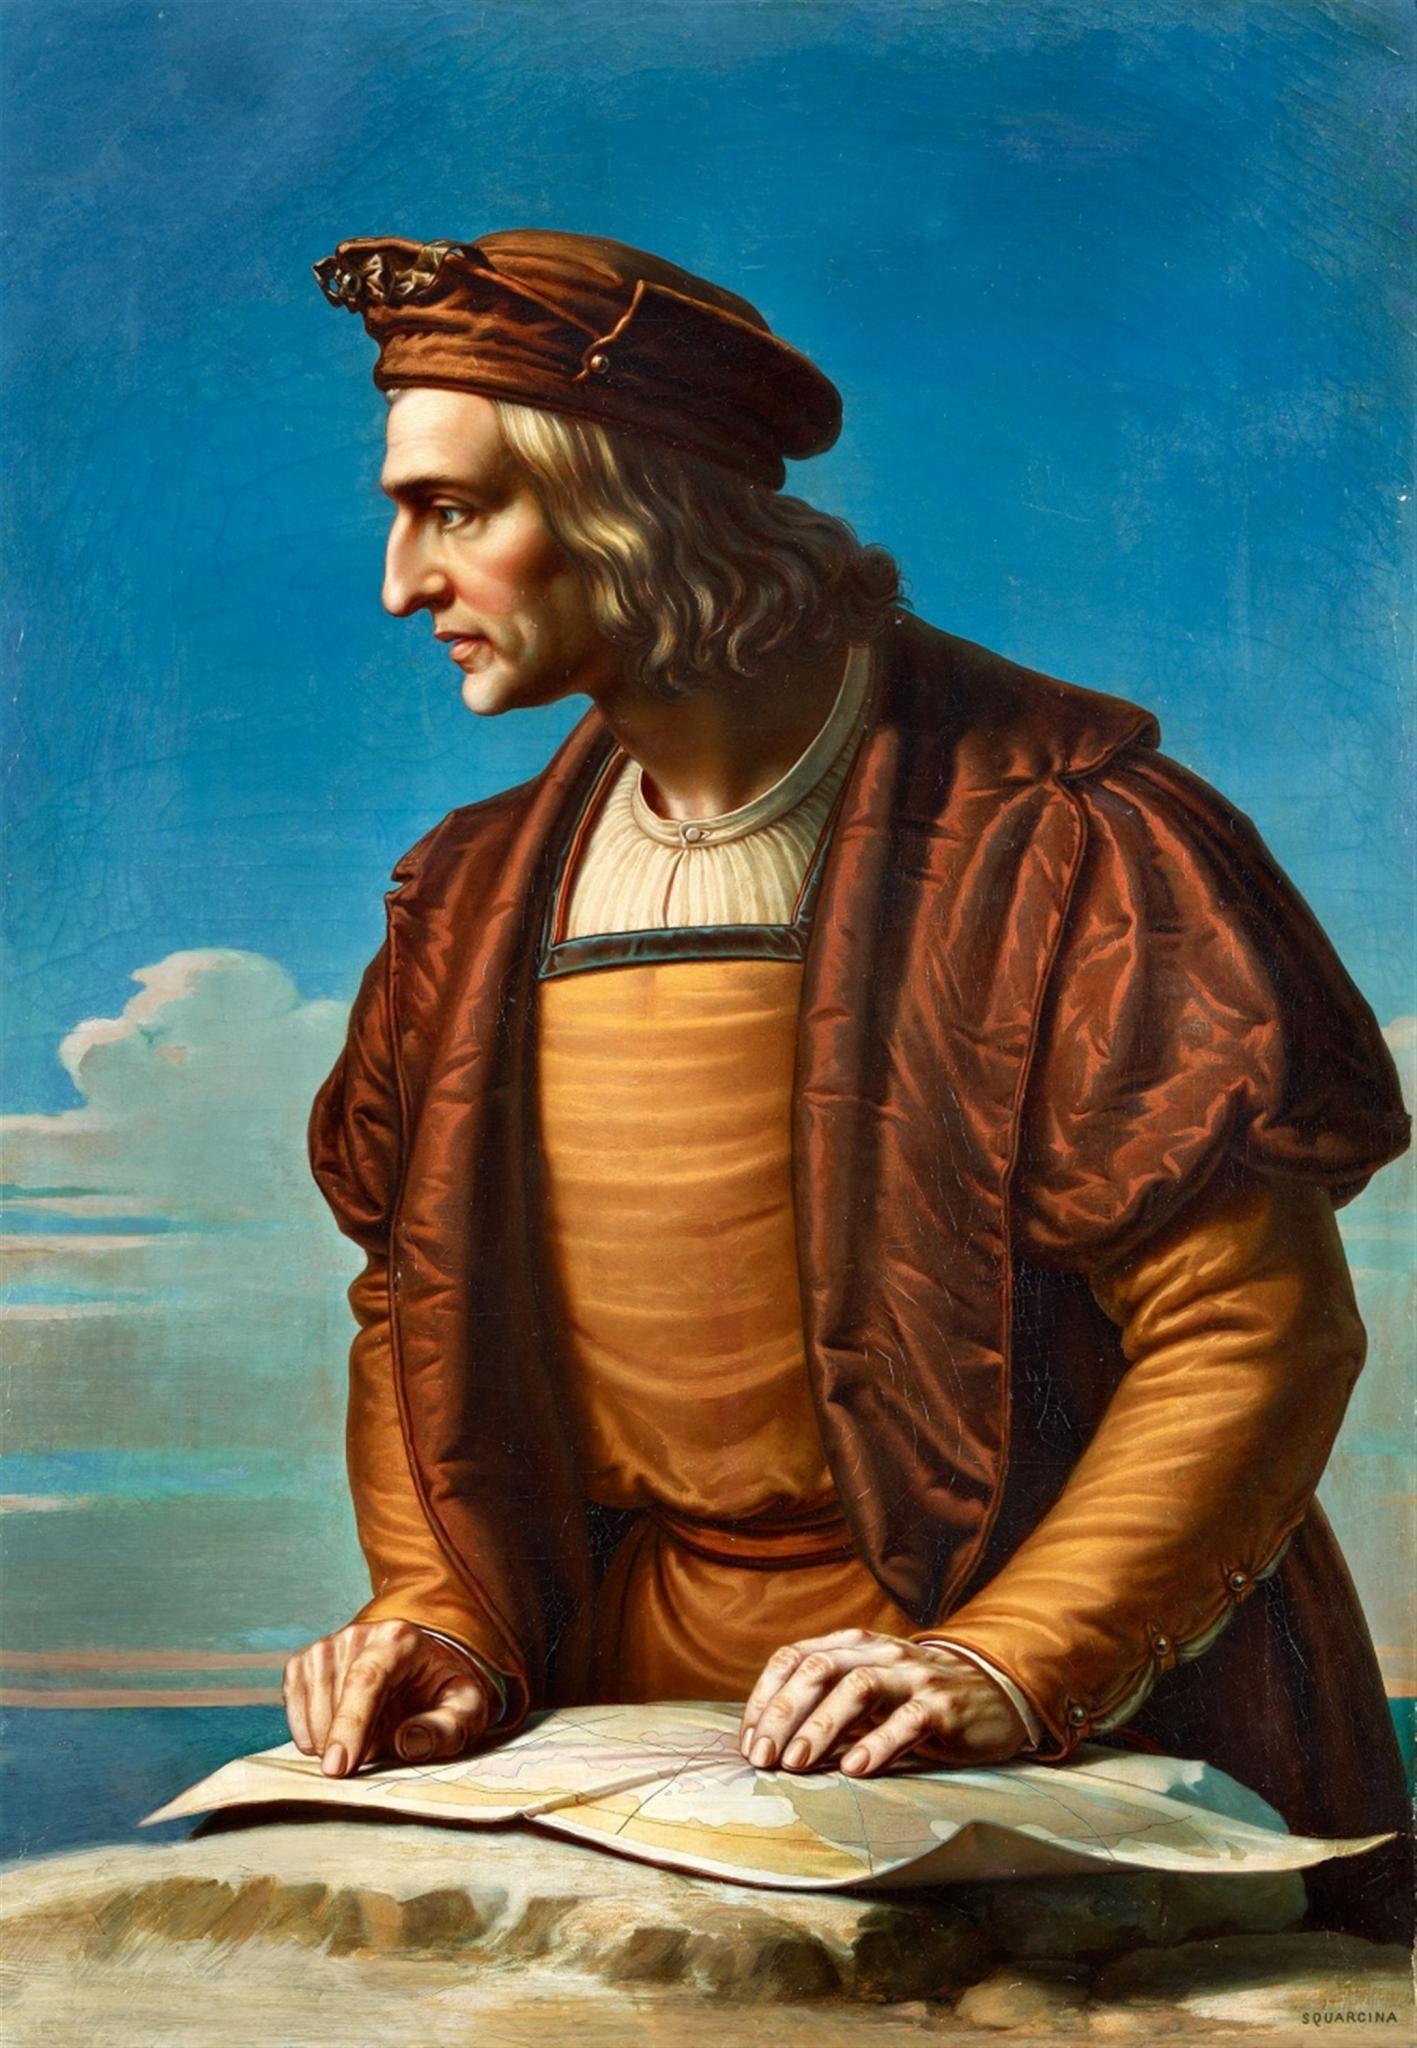 a biography of christopher columbus